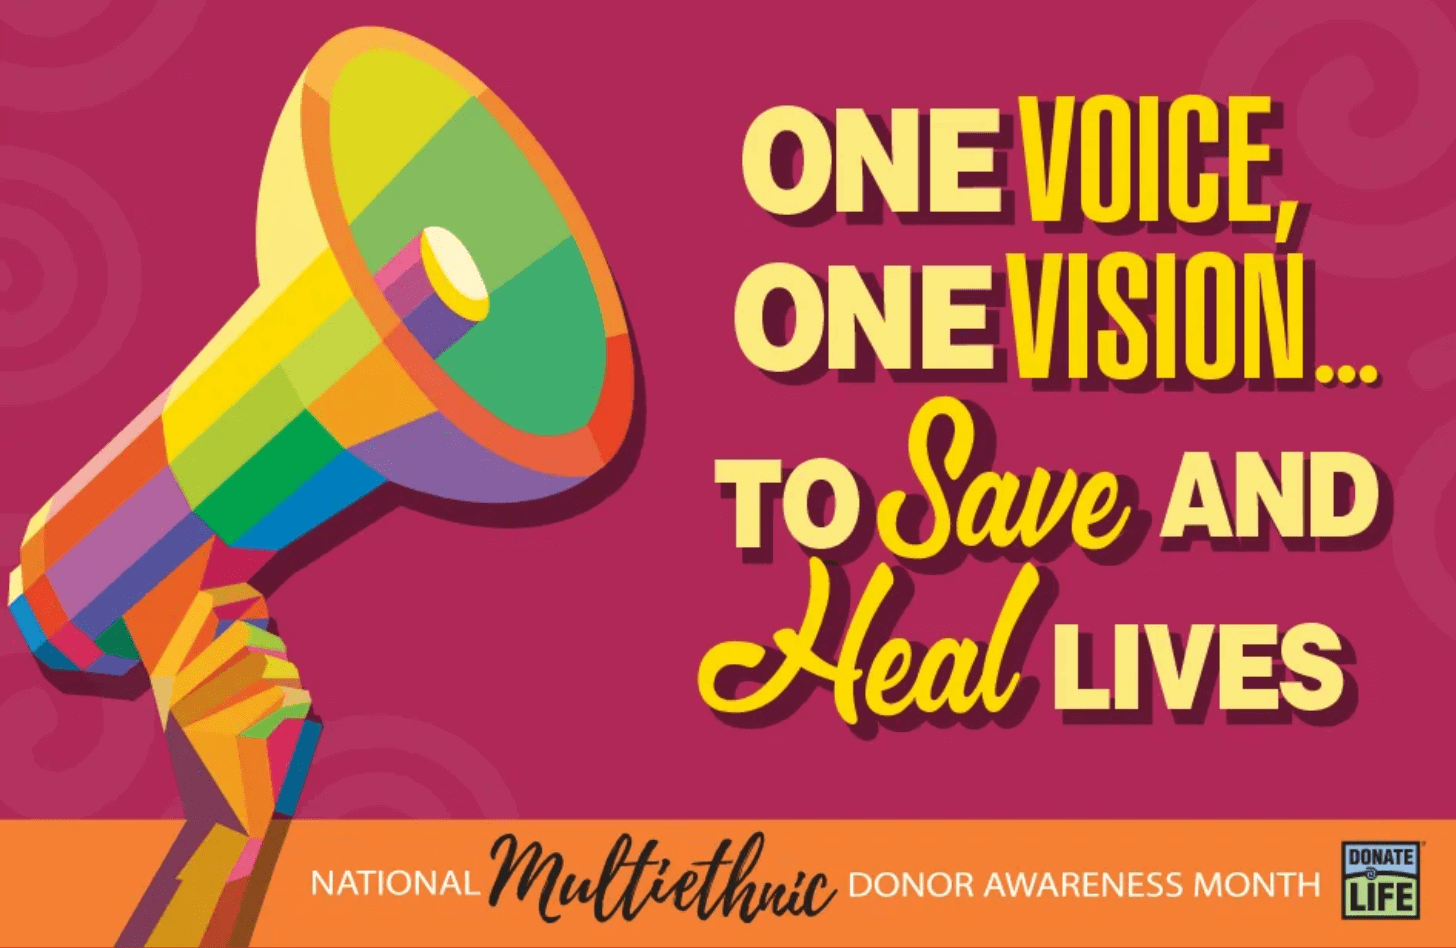 A colorful illustration of a megaphone against a pink background. Text reads: One Voice, One Vision, To save and heal lives